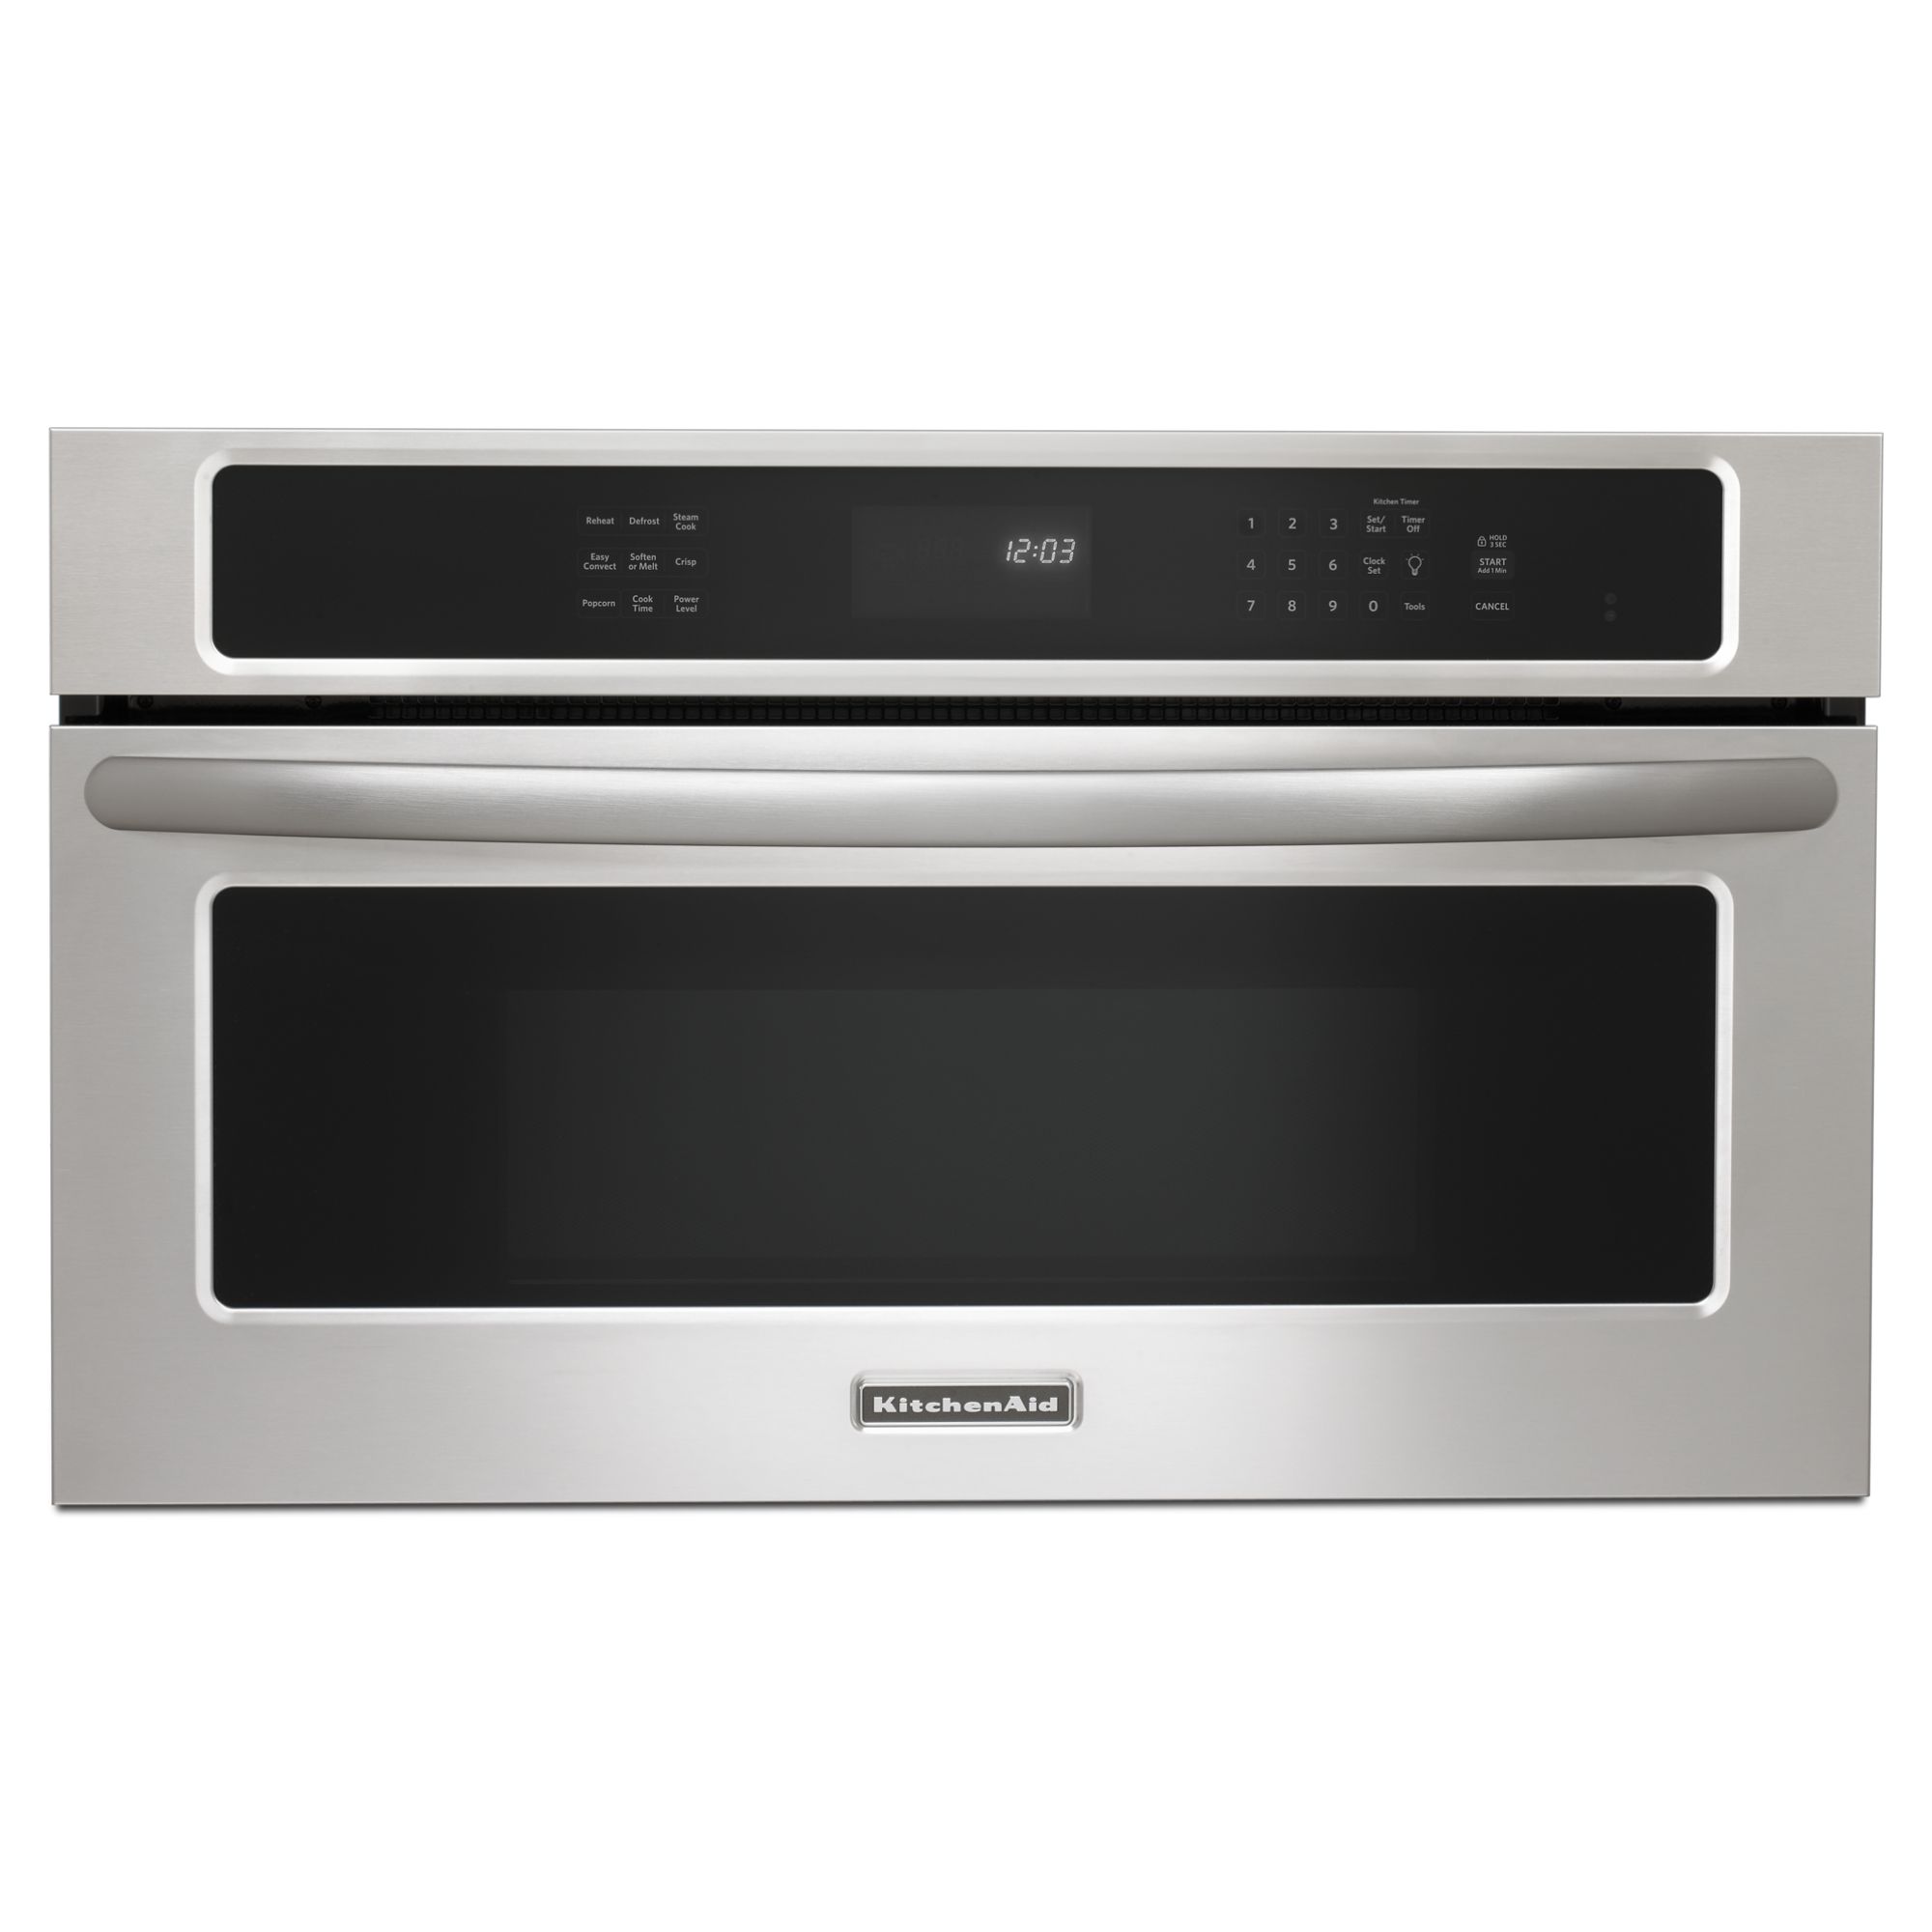 KitchenAid 1.4 cu. ft. 900-Watt 30 Built-in Microwave w/ Convection Cooking - Stainless Steel